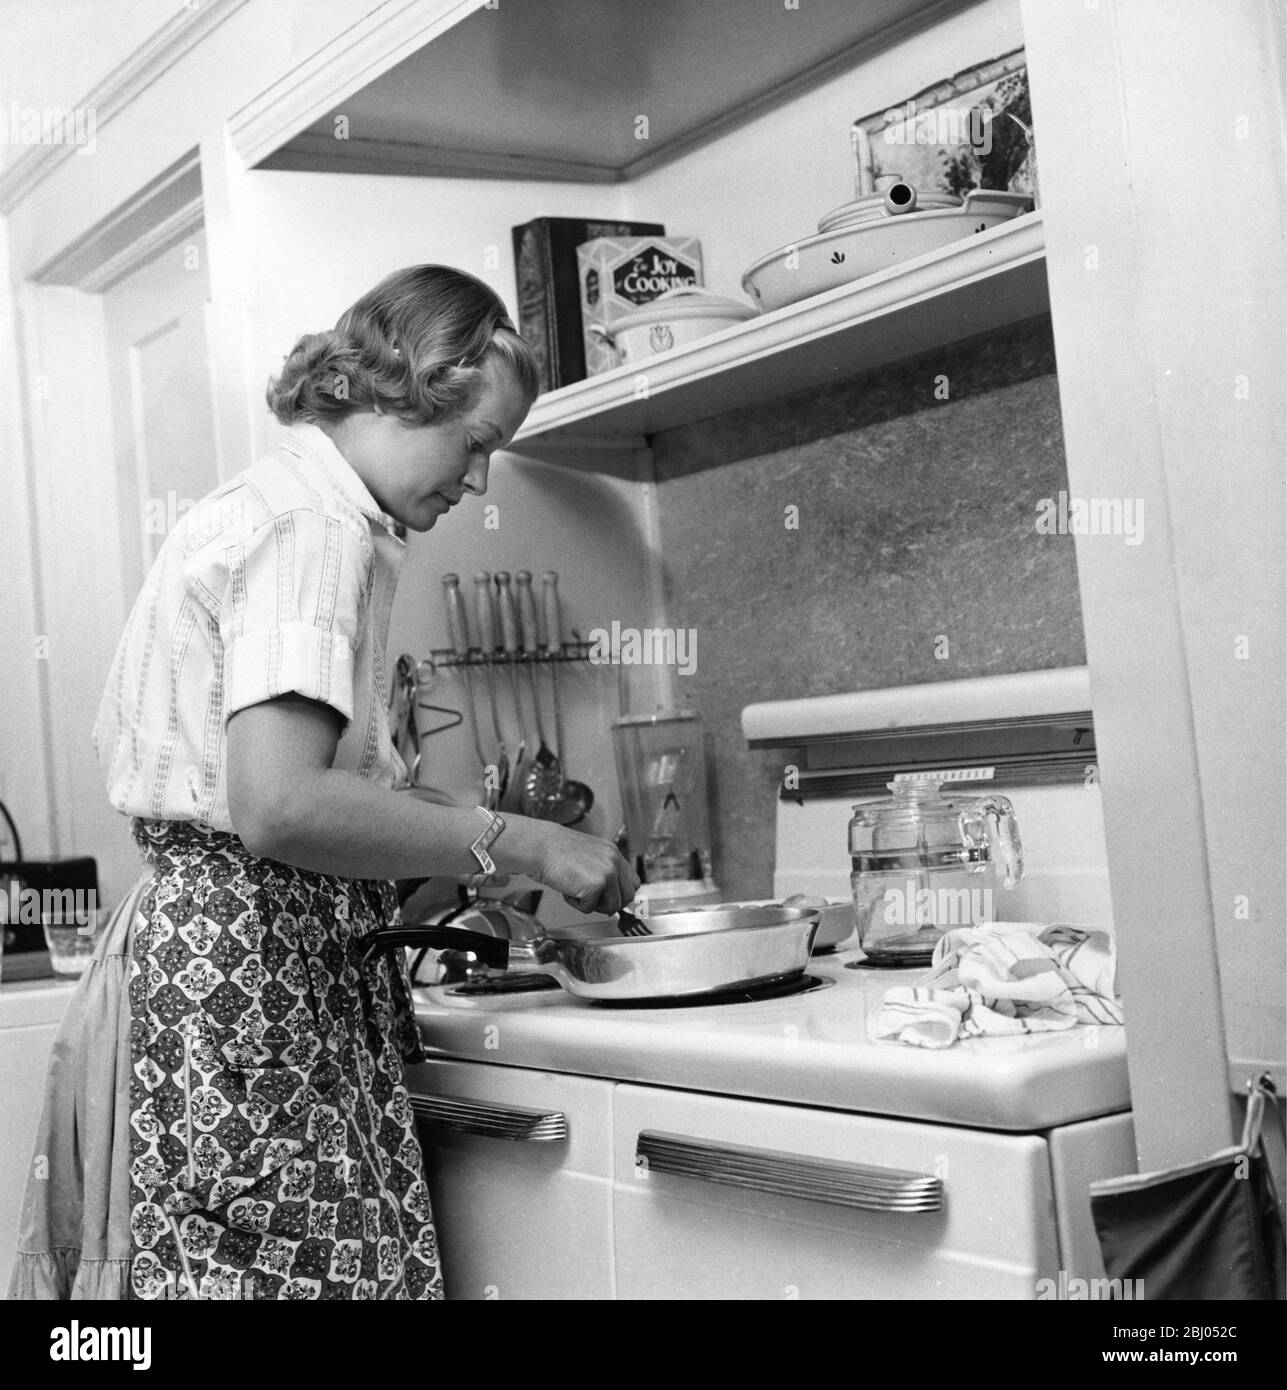 USA early 1950's. Woman in her kitchen preparing a meal. Stock Photo